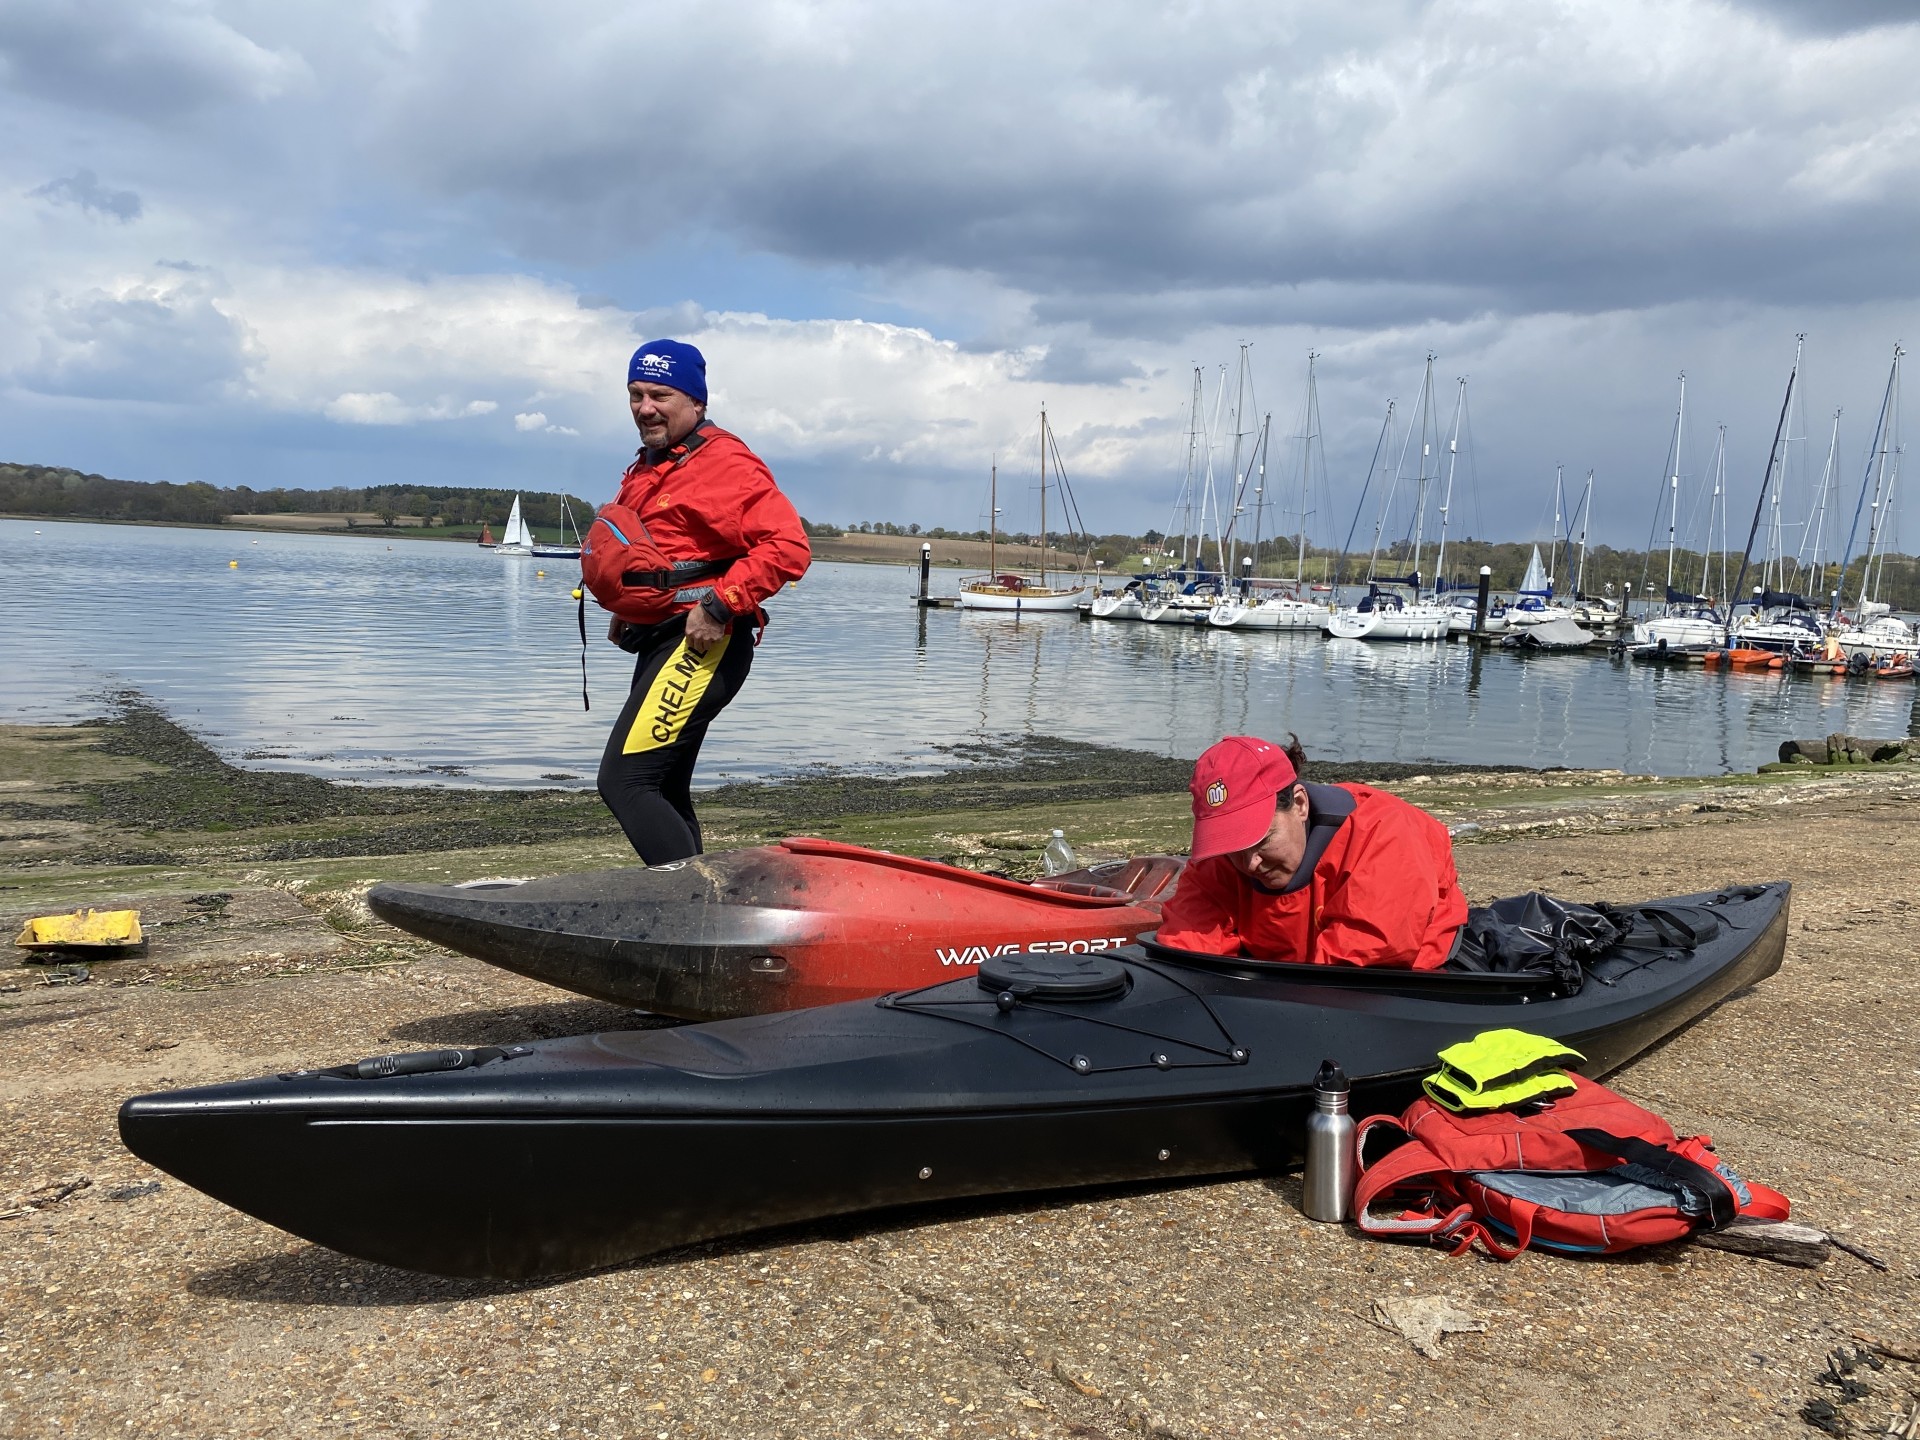 Students preparing their kayaks on the Introduction to Kayaking course.